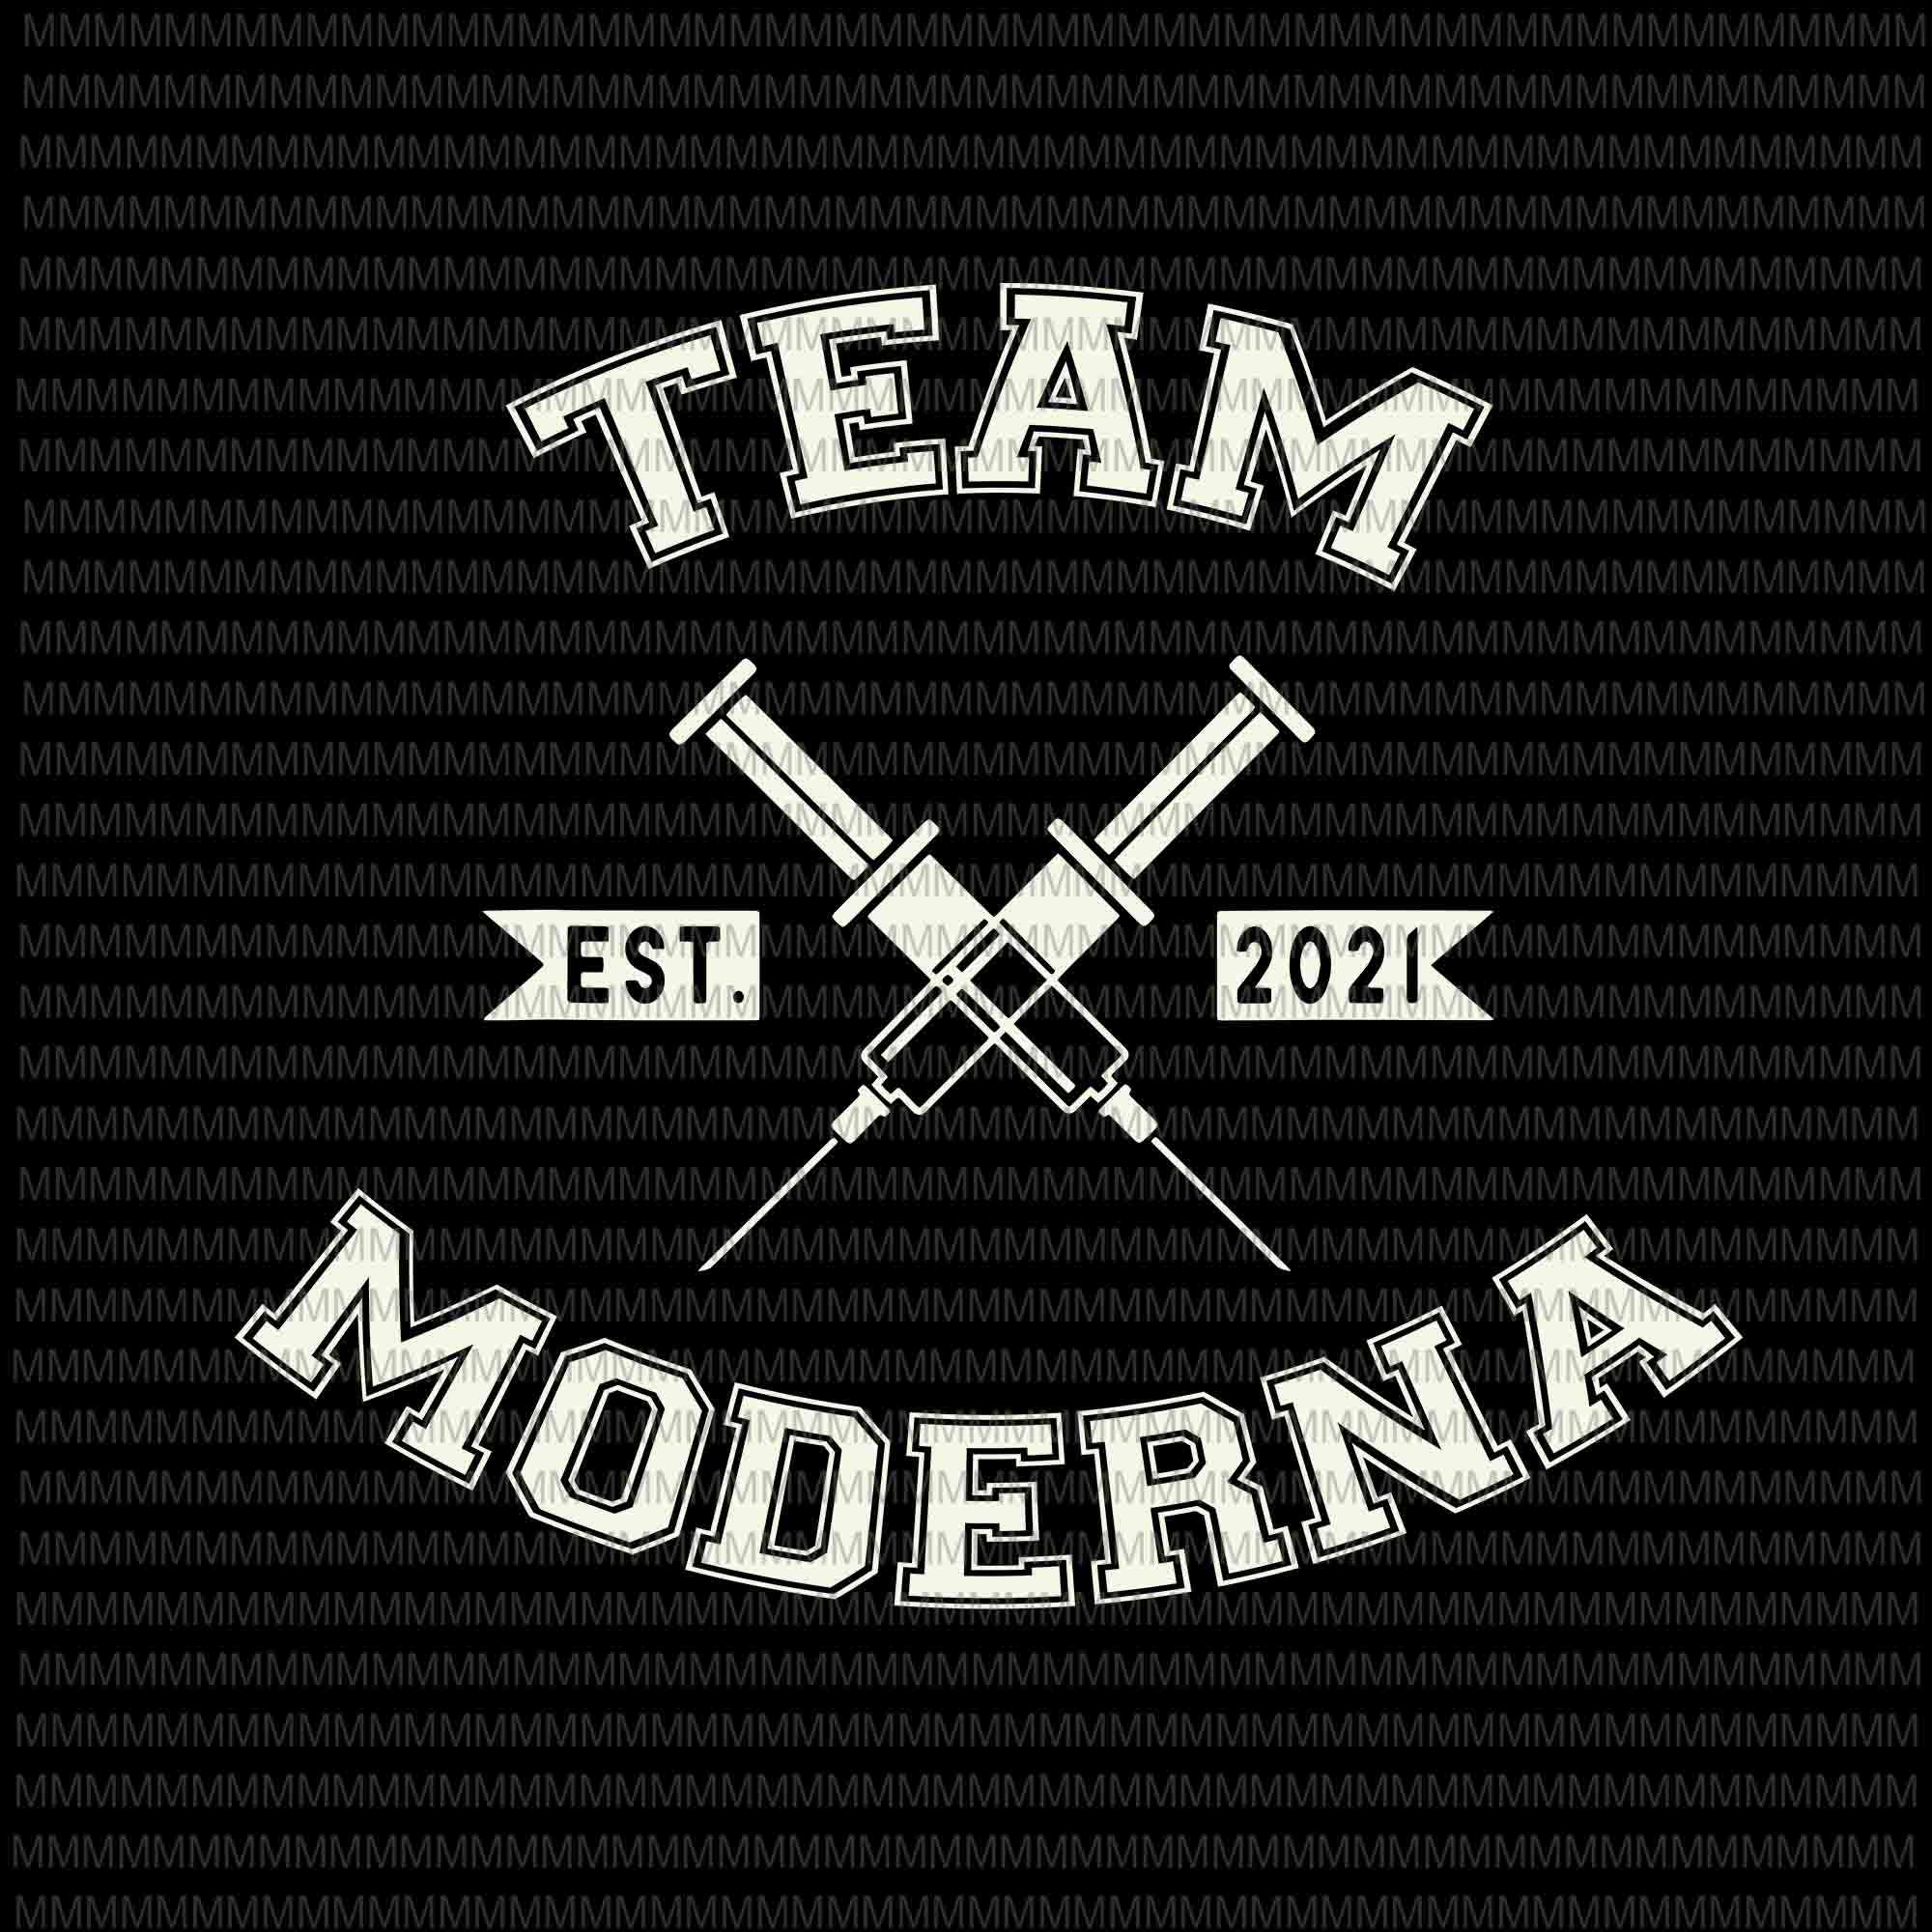 Team Moderna Svg, Moderna 2021 Svg, Moderna Team Vaccinated Svg, png, dxf, eps